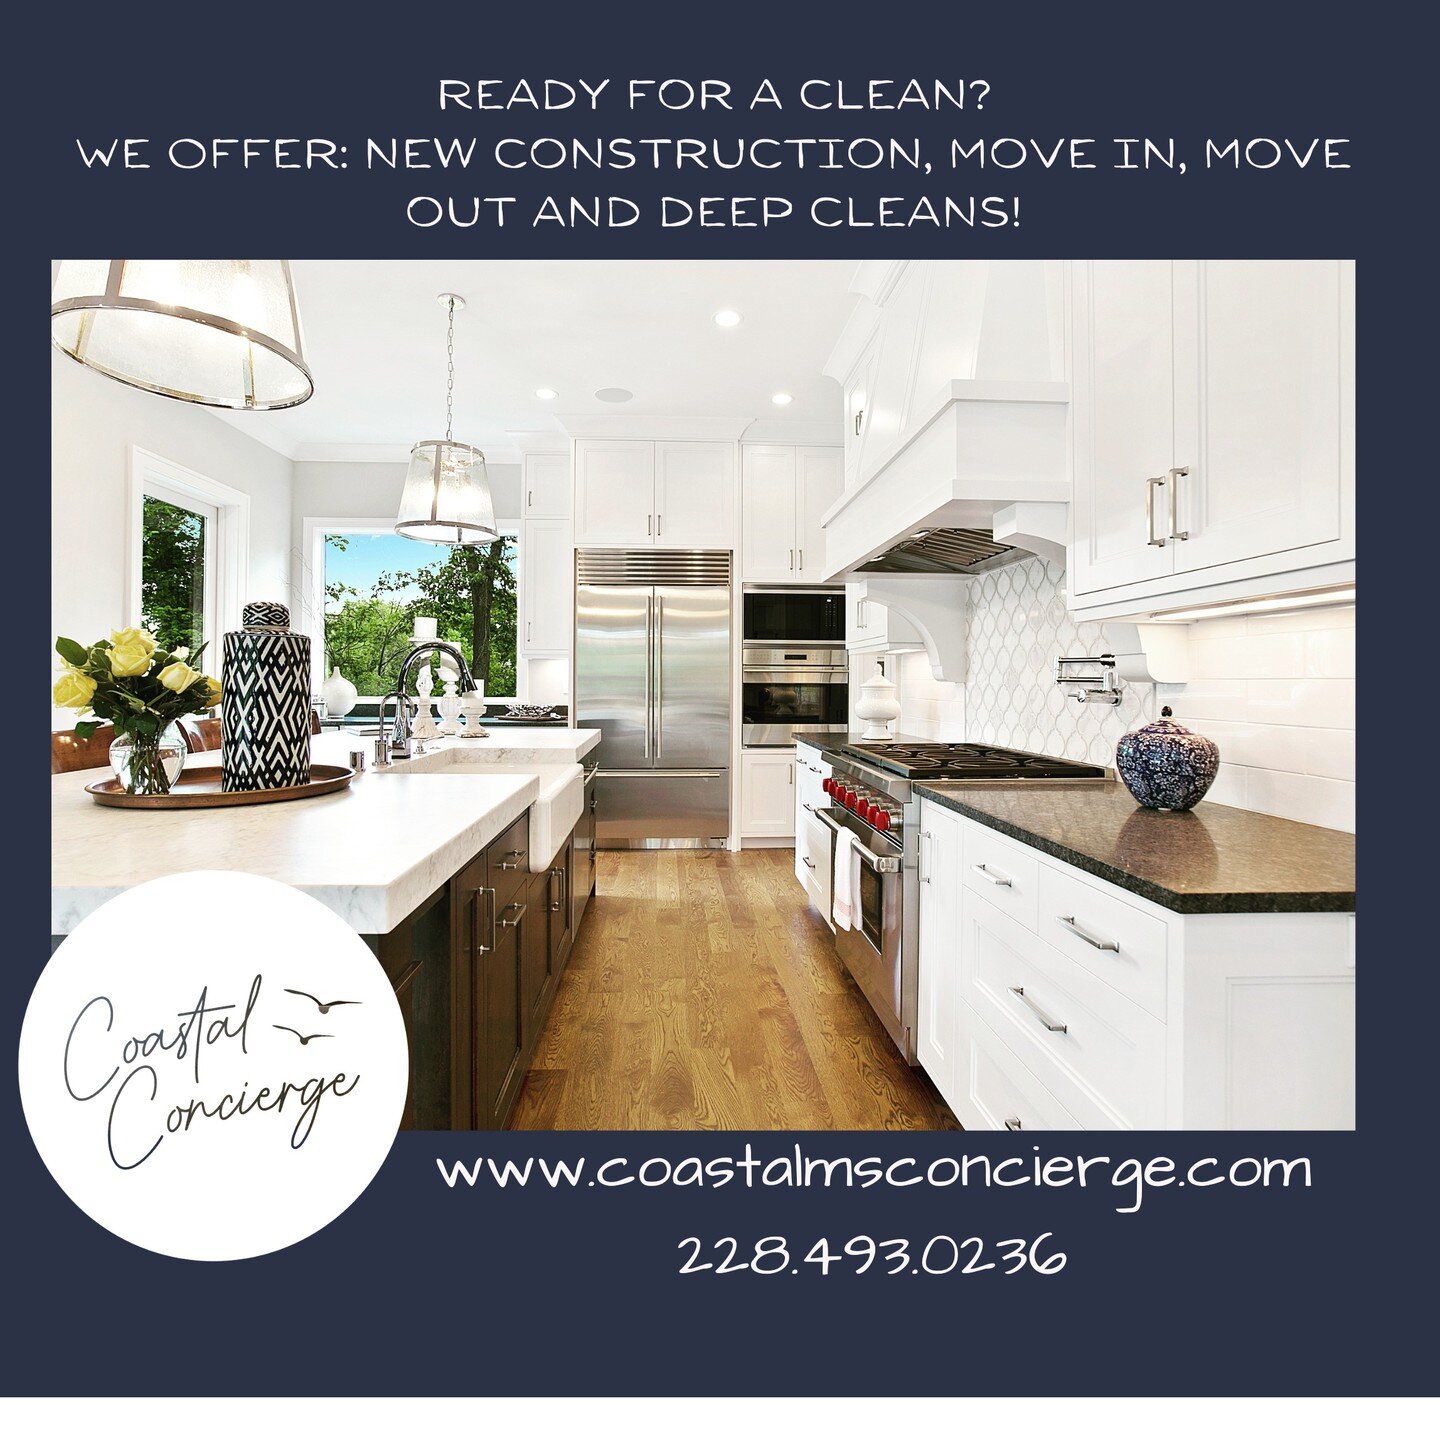 Cleaning services for all your cleaning needs!
Construction, Move-In/Move-Out, Deep Cleans, Residential and Vacation Rental Cleaning Services!

#cleaningservicesms #msgulfcoast #vacationrentalcleans #strcleans